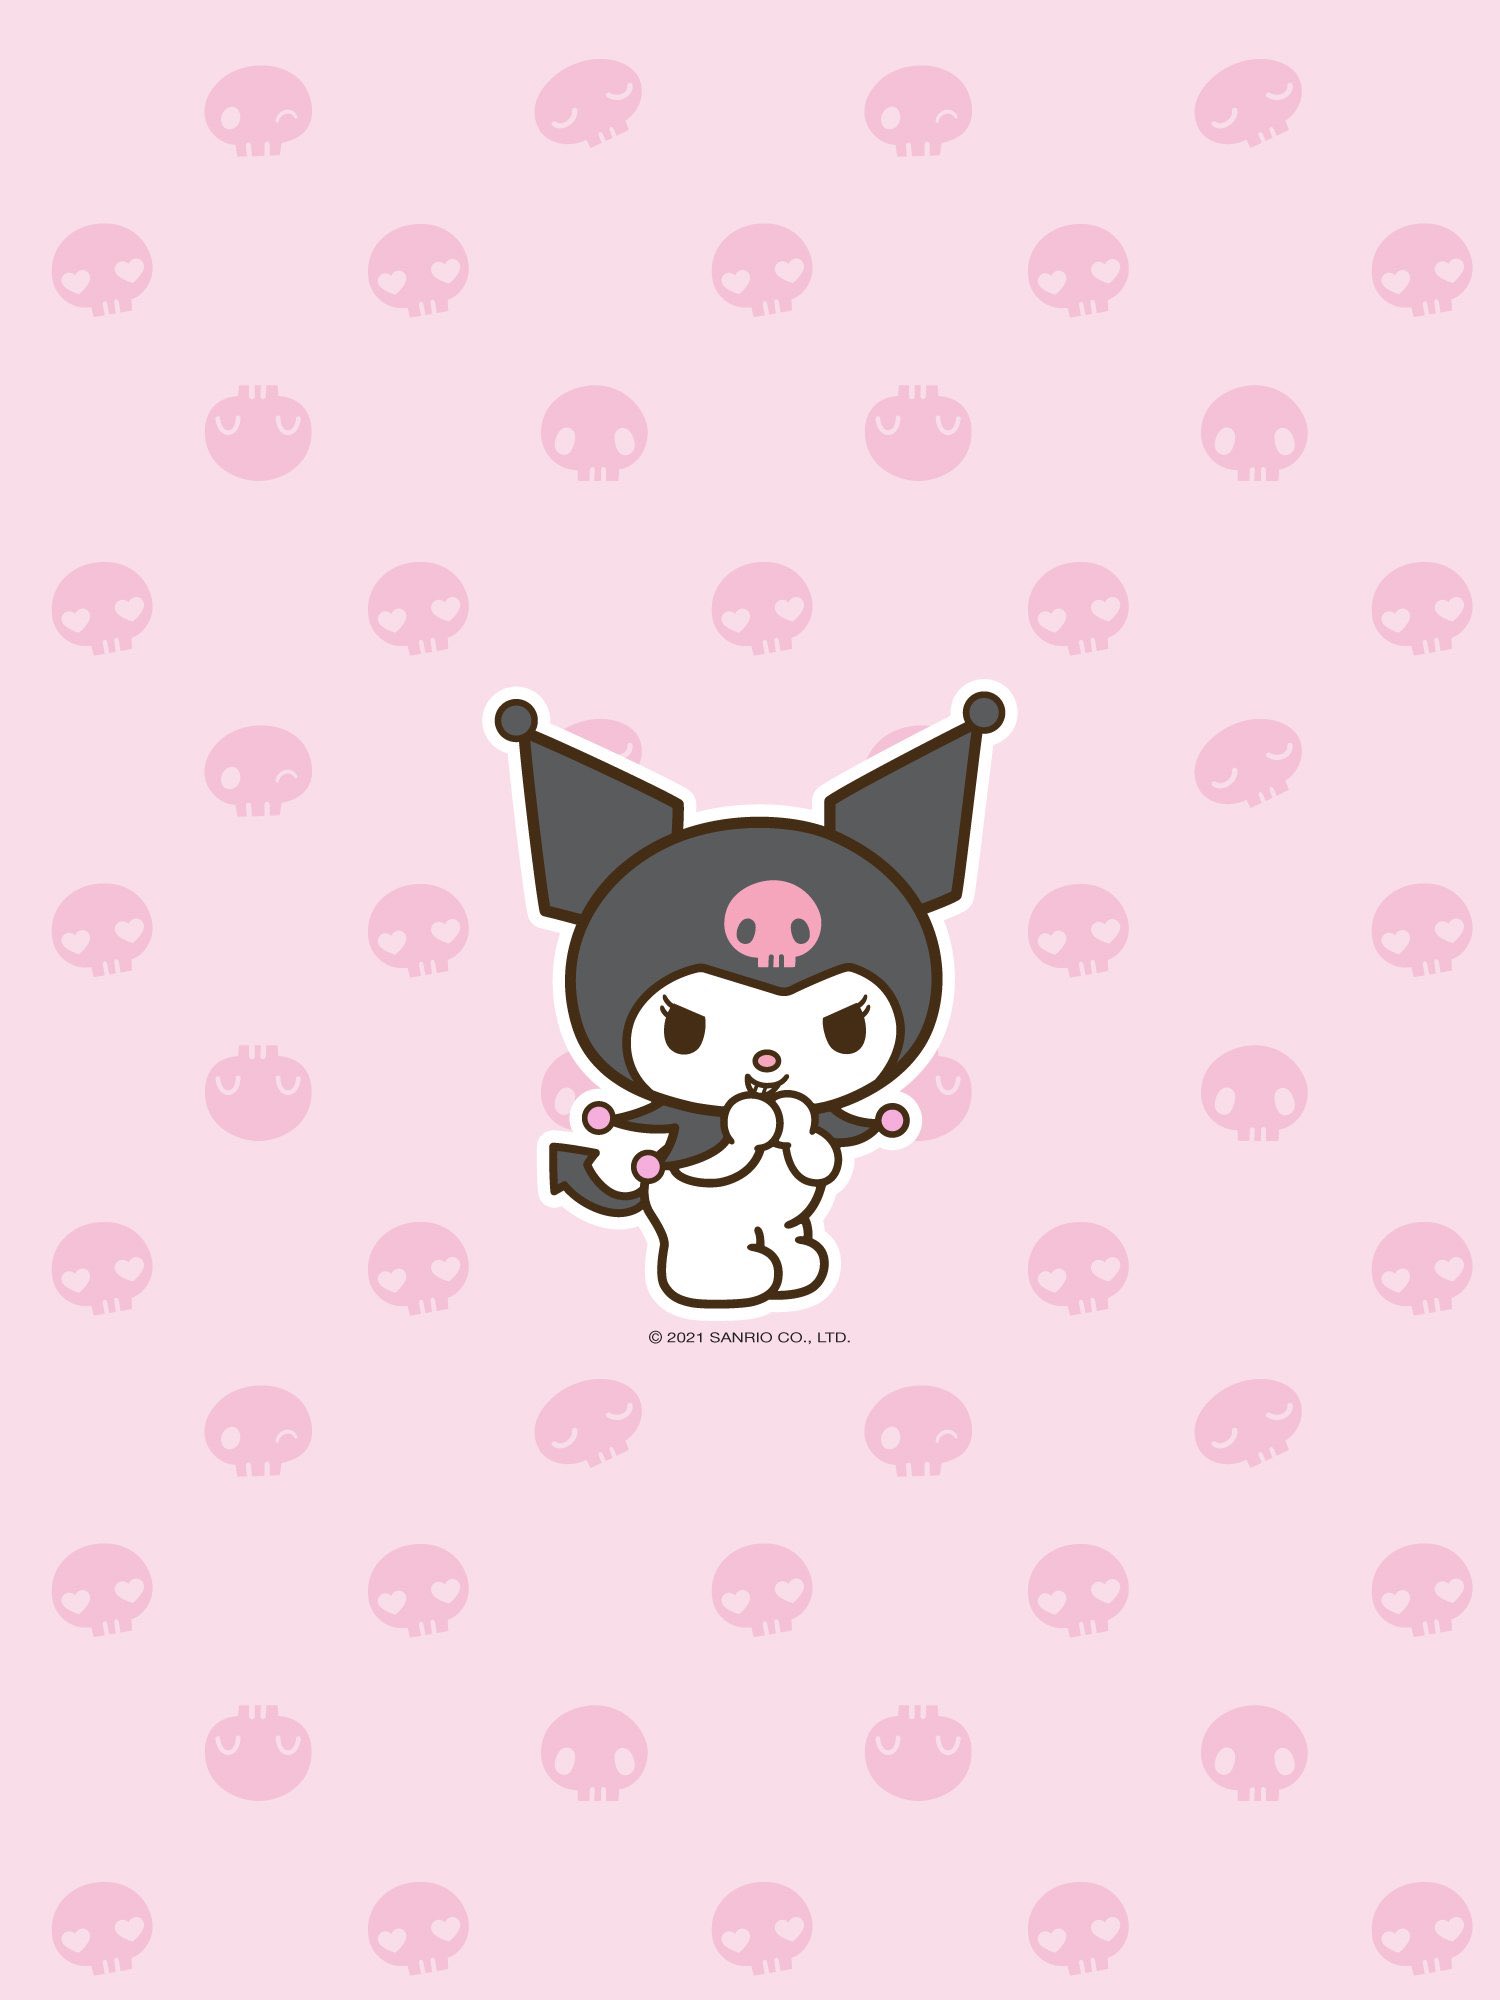 A cute little cat with black and white ears - Kuromi, Sanrio